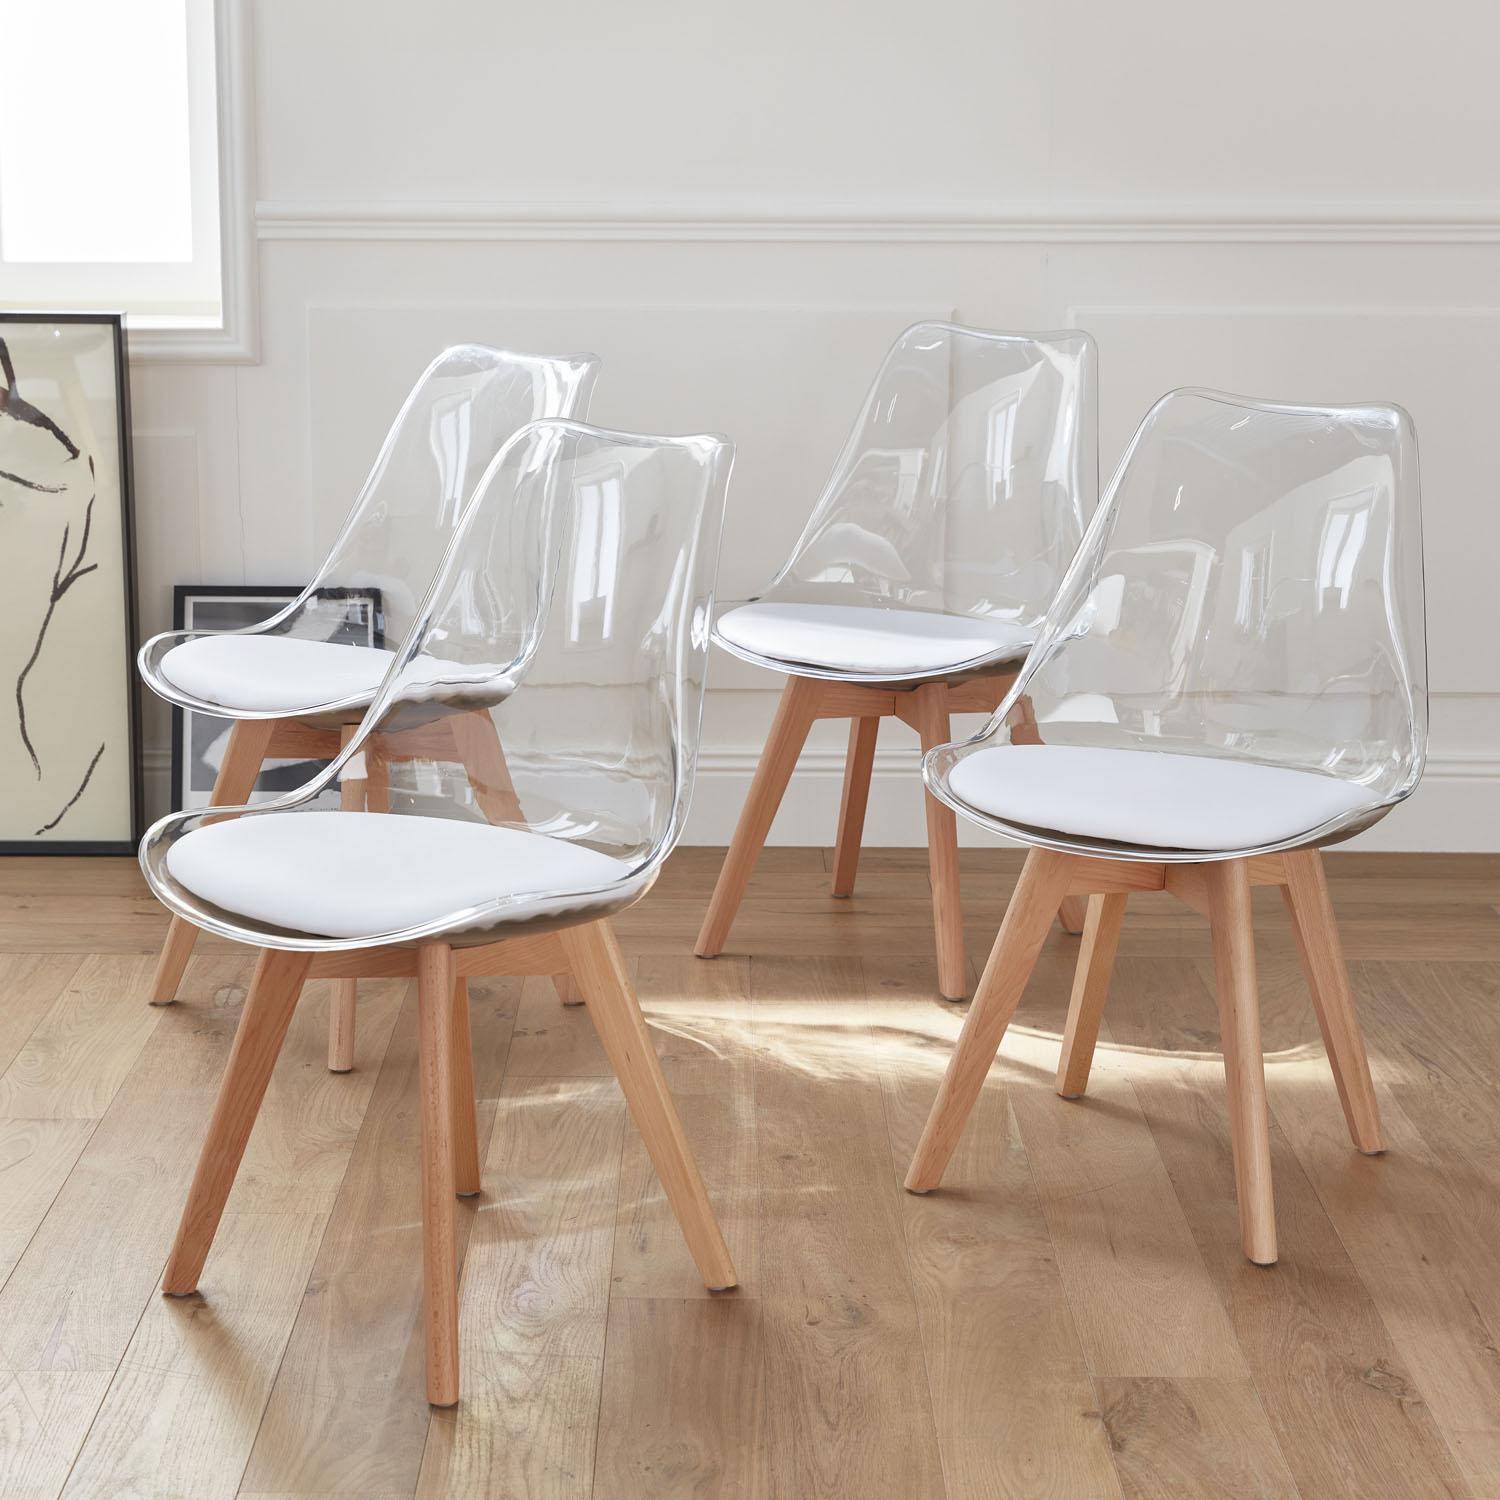 Set of 4 Scandi-style dining chairs with wooden legs, 100% leather cushions and acrylic shell - Lagertha - Clear and White Photo2